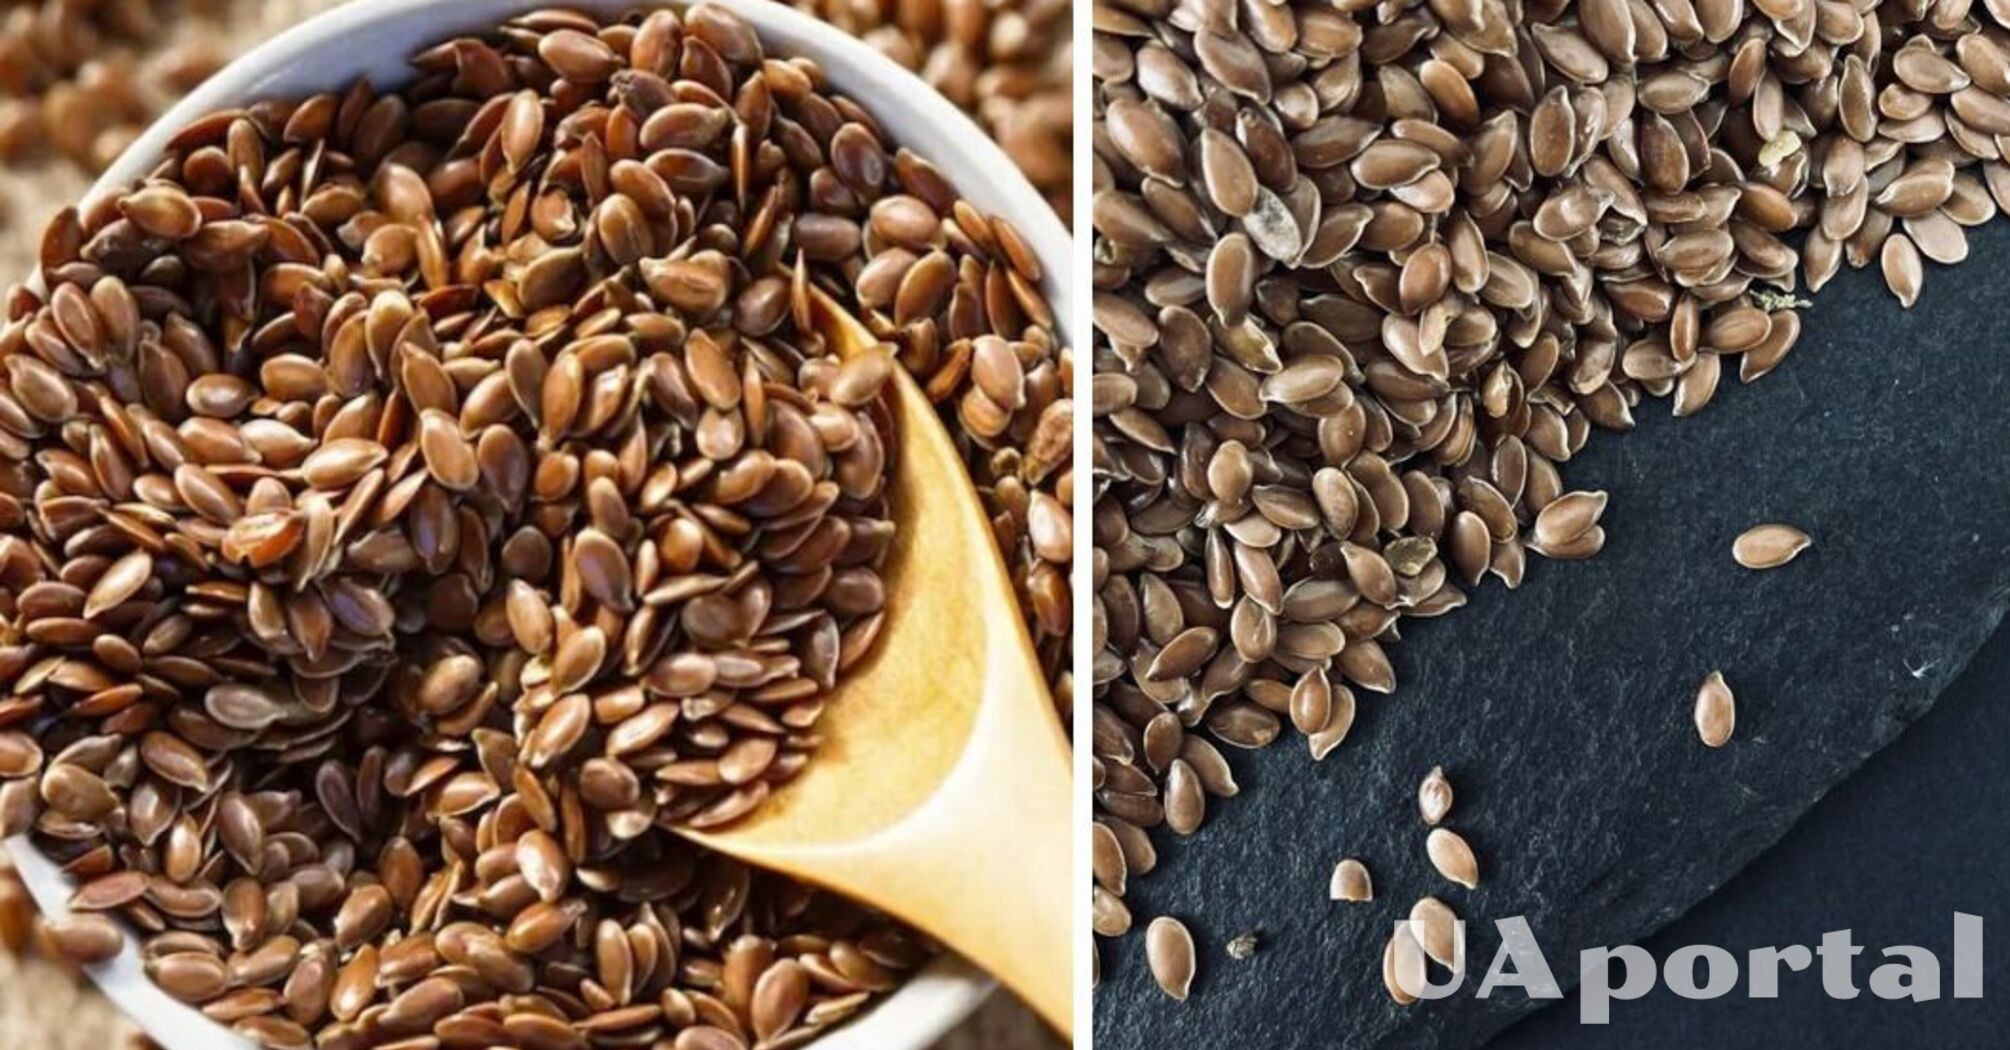 Can flaxseed be eaten daily